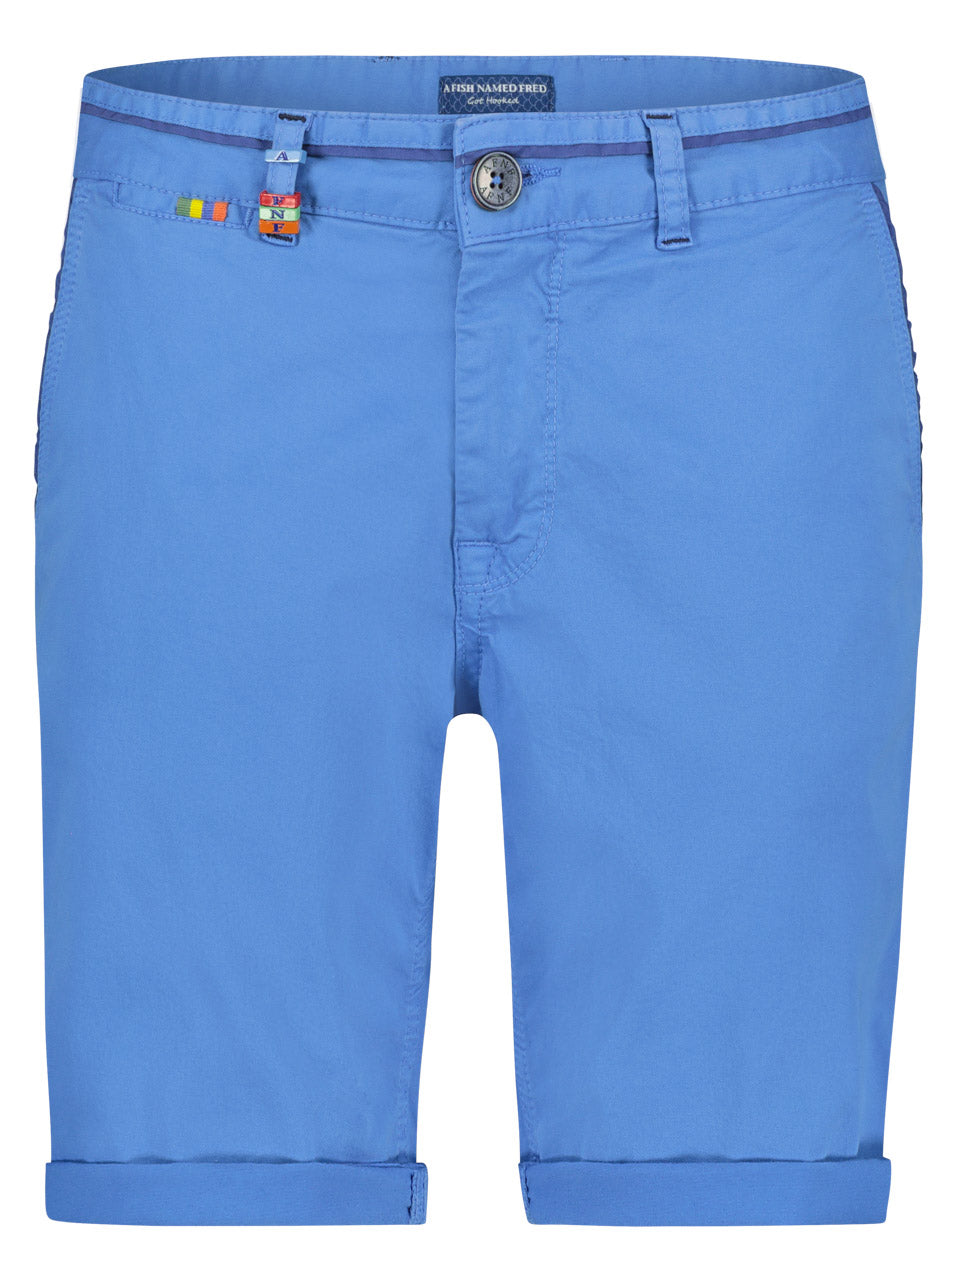 A FISH NAMED FRED Peached Twill Shorts in Cobalt Blue 2603225